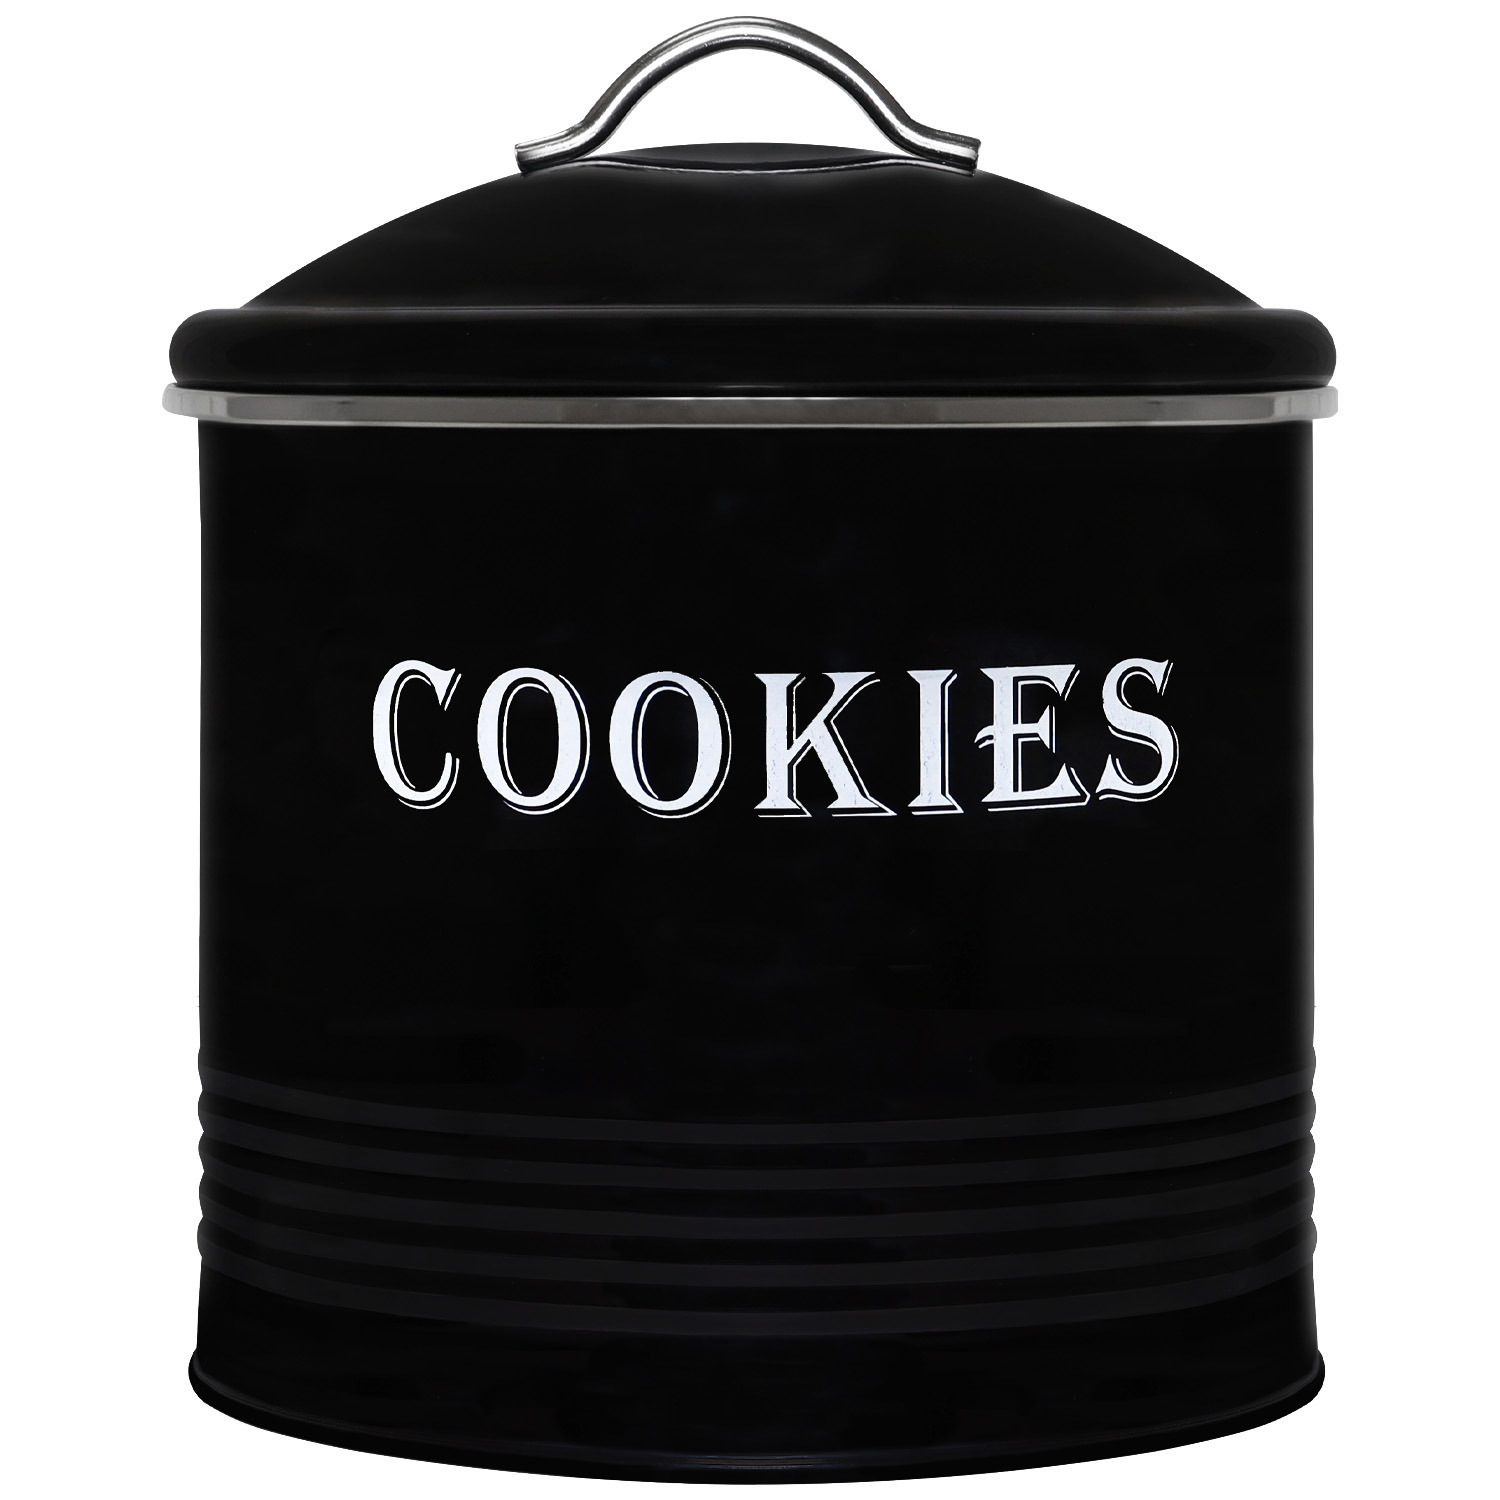 Blue Donuts  Tin Cover, Black Cookie Jar